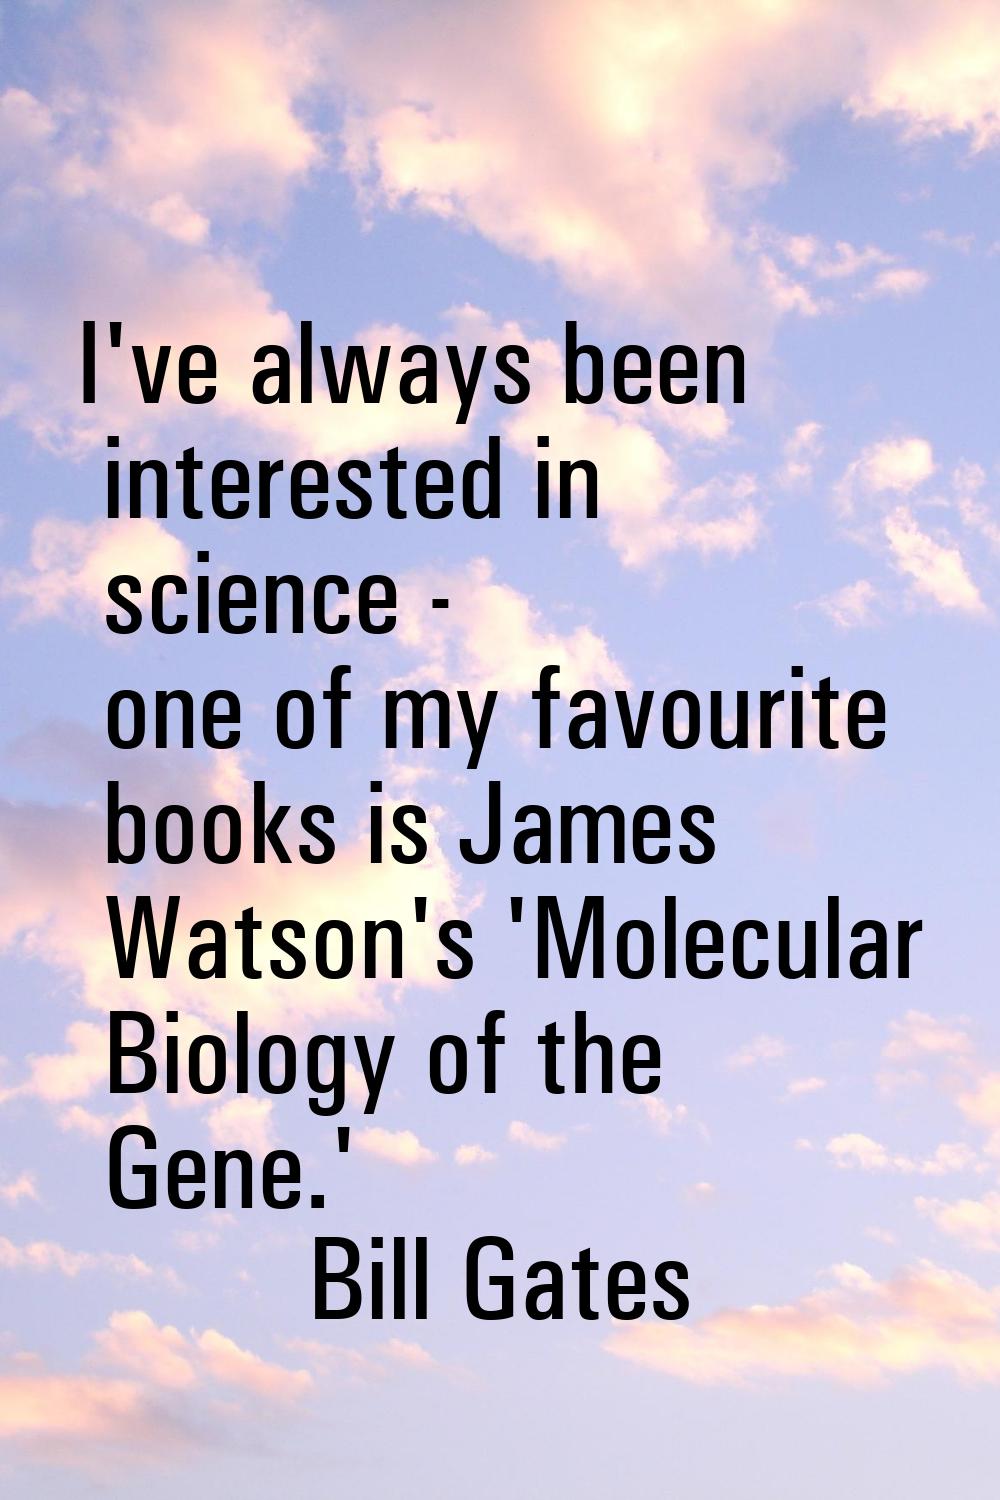 I've always been interested in science - one of my favourite books is James Watson's 'Molecular Bio